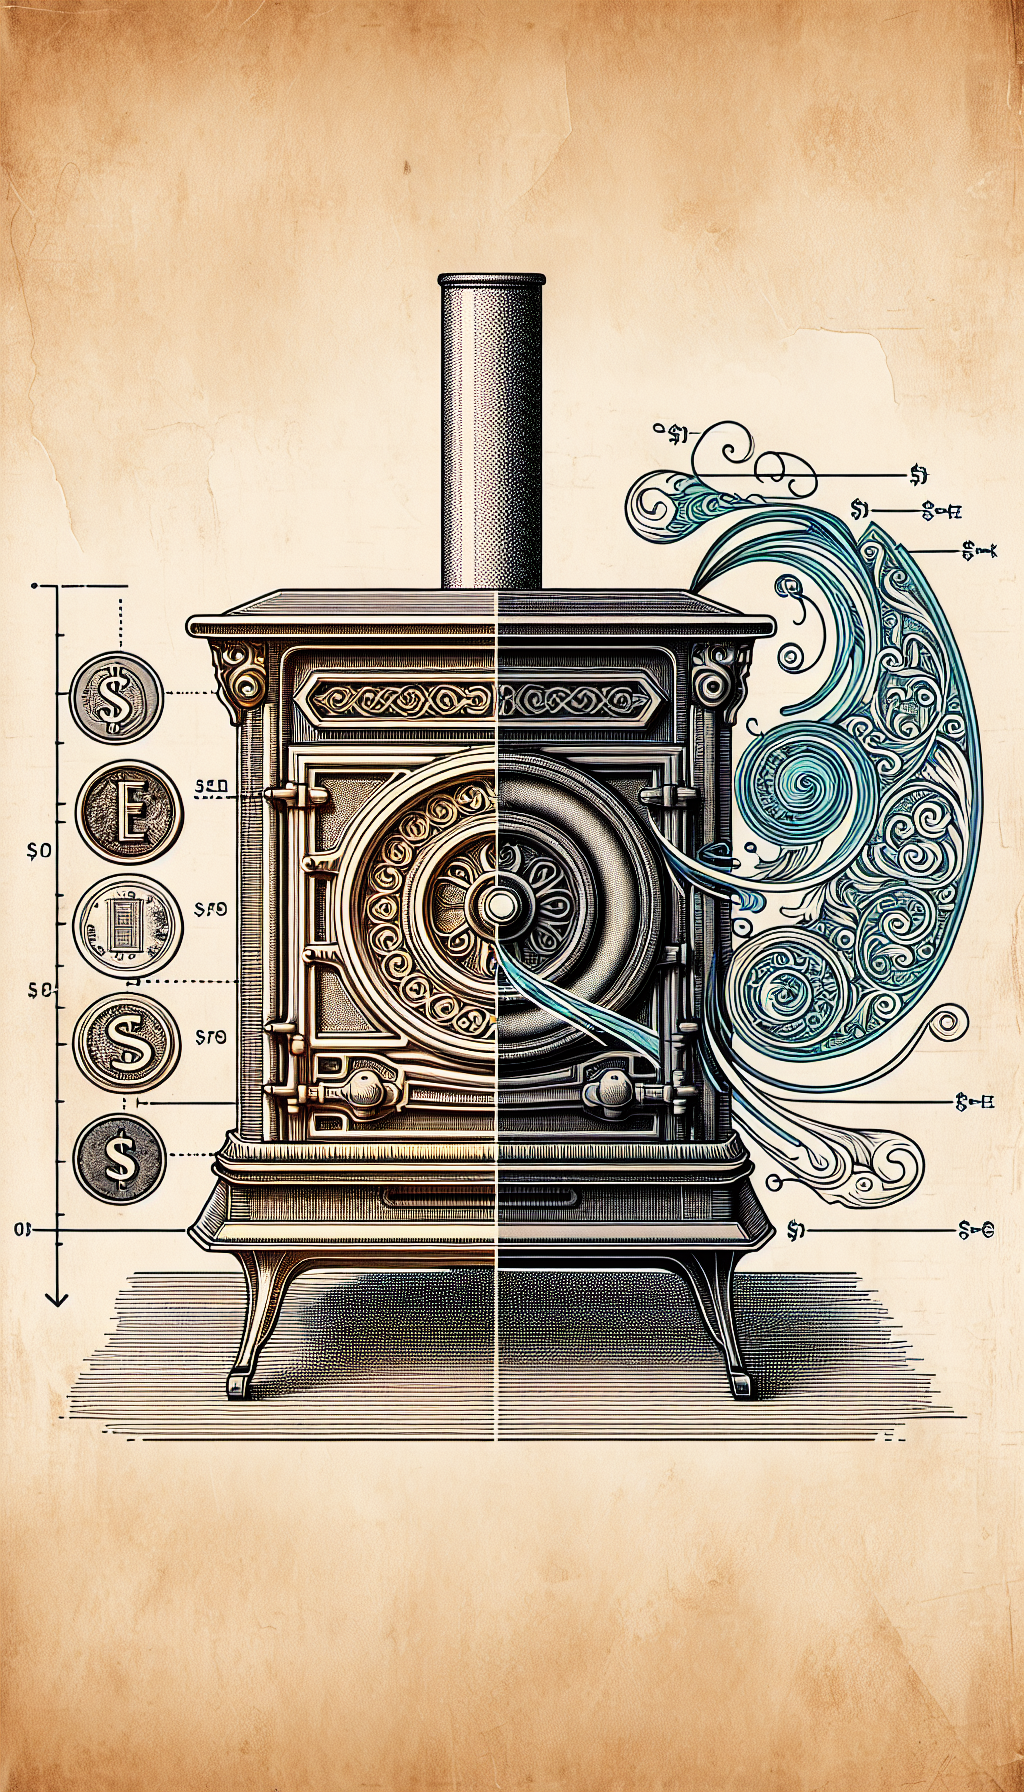 An intricate line art illustration depicts an antique stove with half crafted in sleek, modern steel and half in rustic, patinated cast iron, symbolizing the evolution of construction materials. A transparent "value gauge" overlays the stove, with historical motifs and currency symbols spiraling towards the well-crafted side, visually connecting material quality to the antique stove's worth.